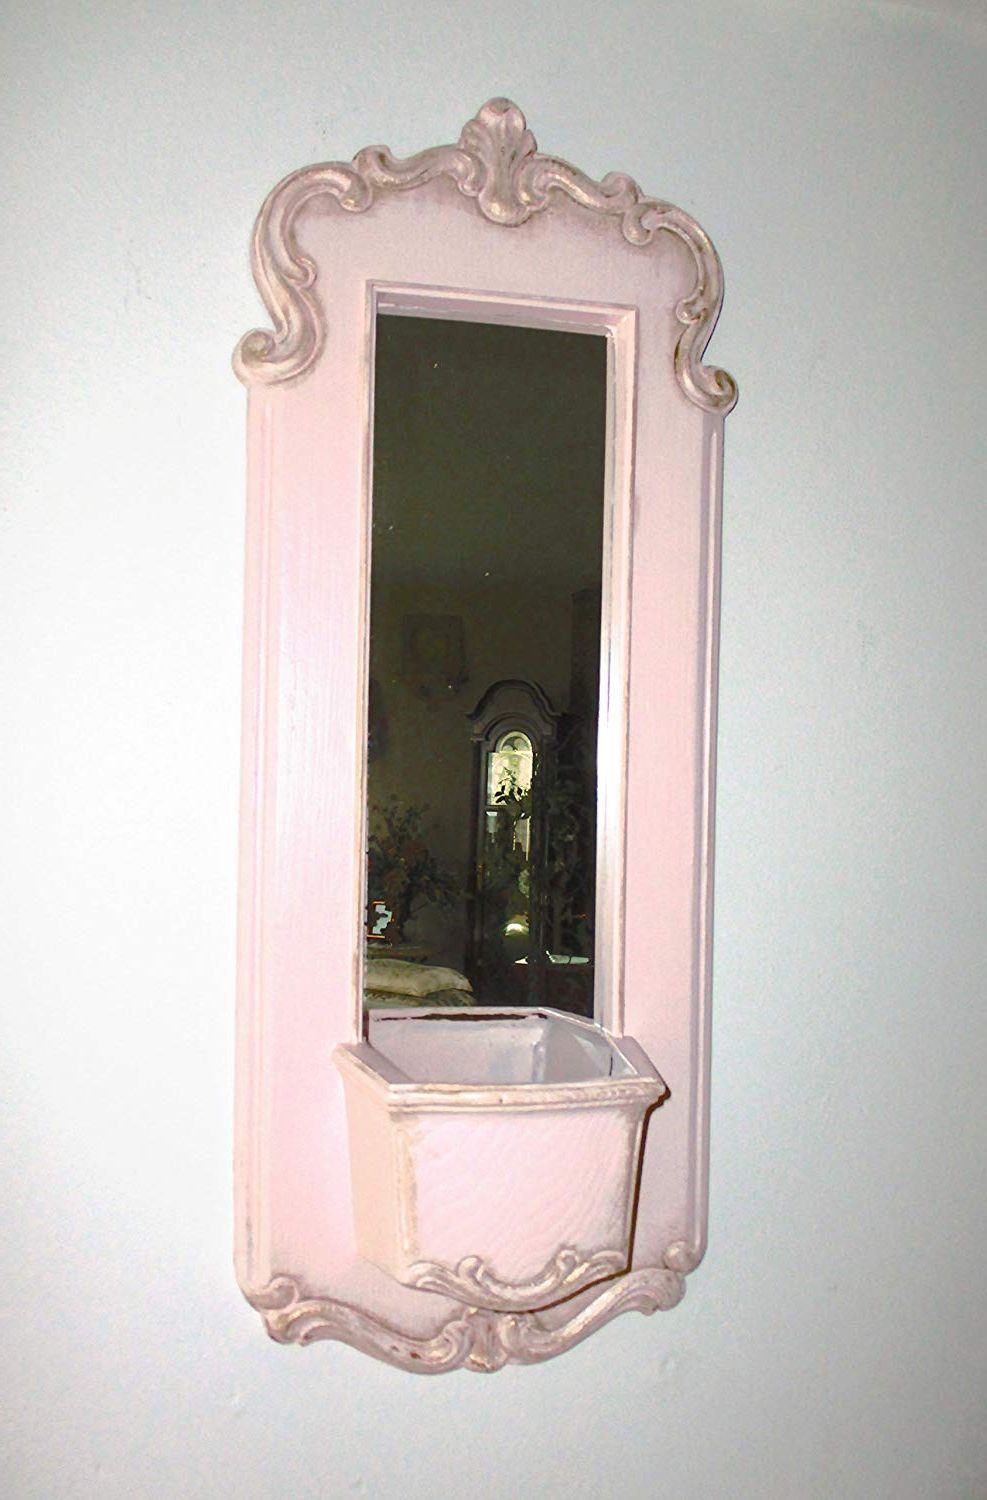 Amazon: Wall Mirror With Pocket, Upcycled Vintage, Distressed Within Newest Childrens Wall Mirrors (View 12 of 20)